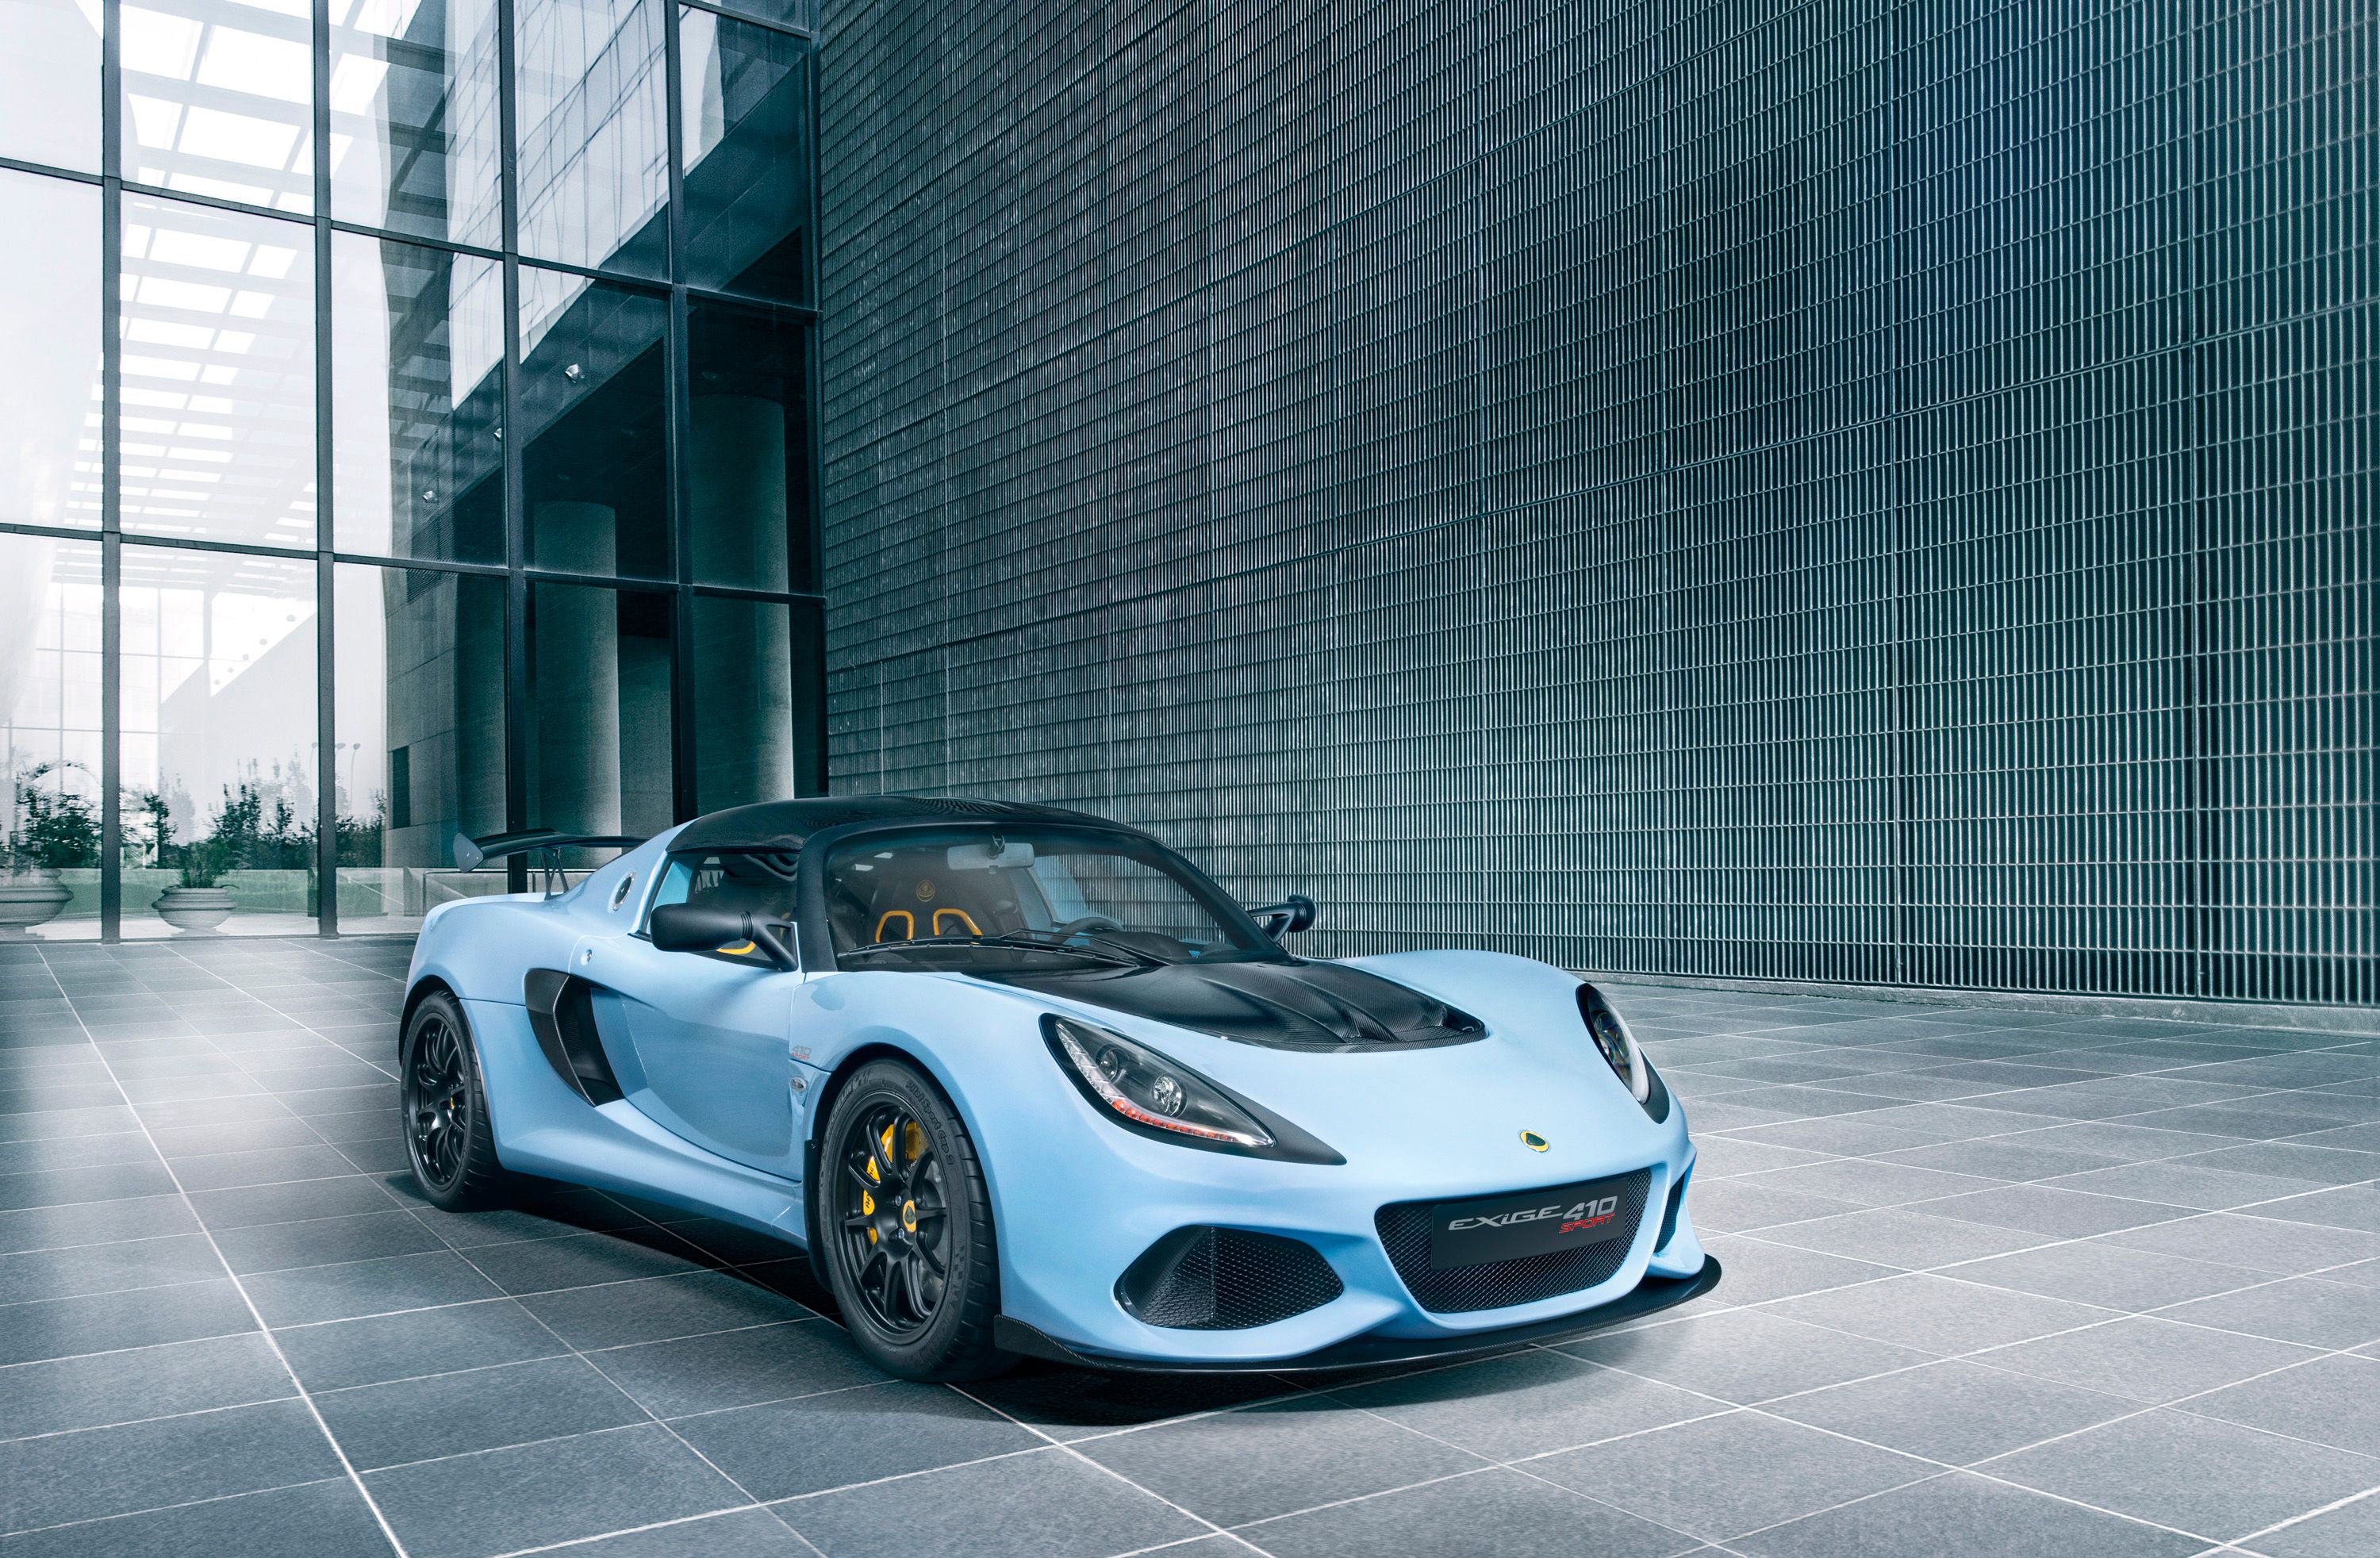 2019 Wallpaper of the Day: 2018 Lotus Exige Sport 410